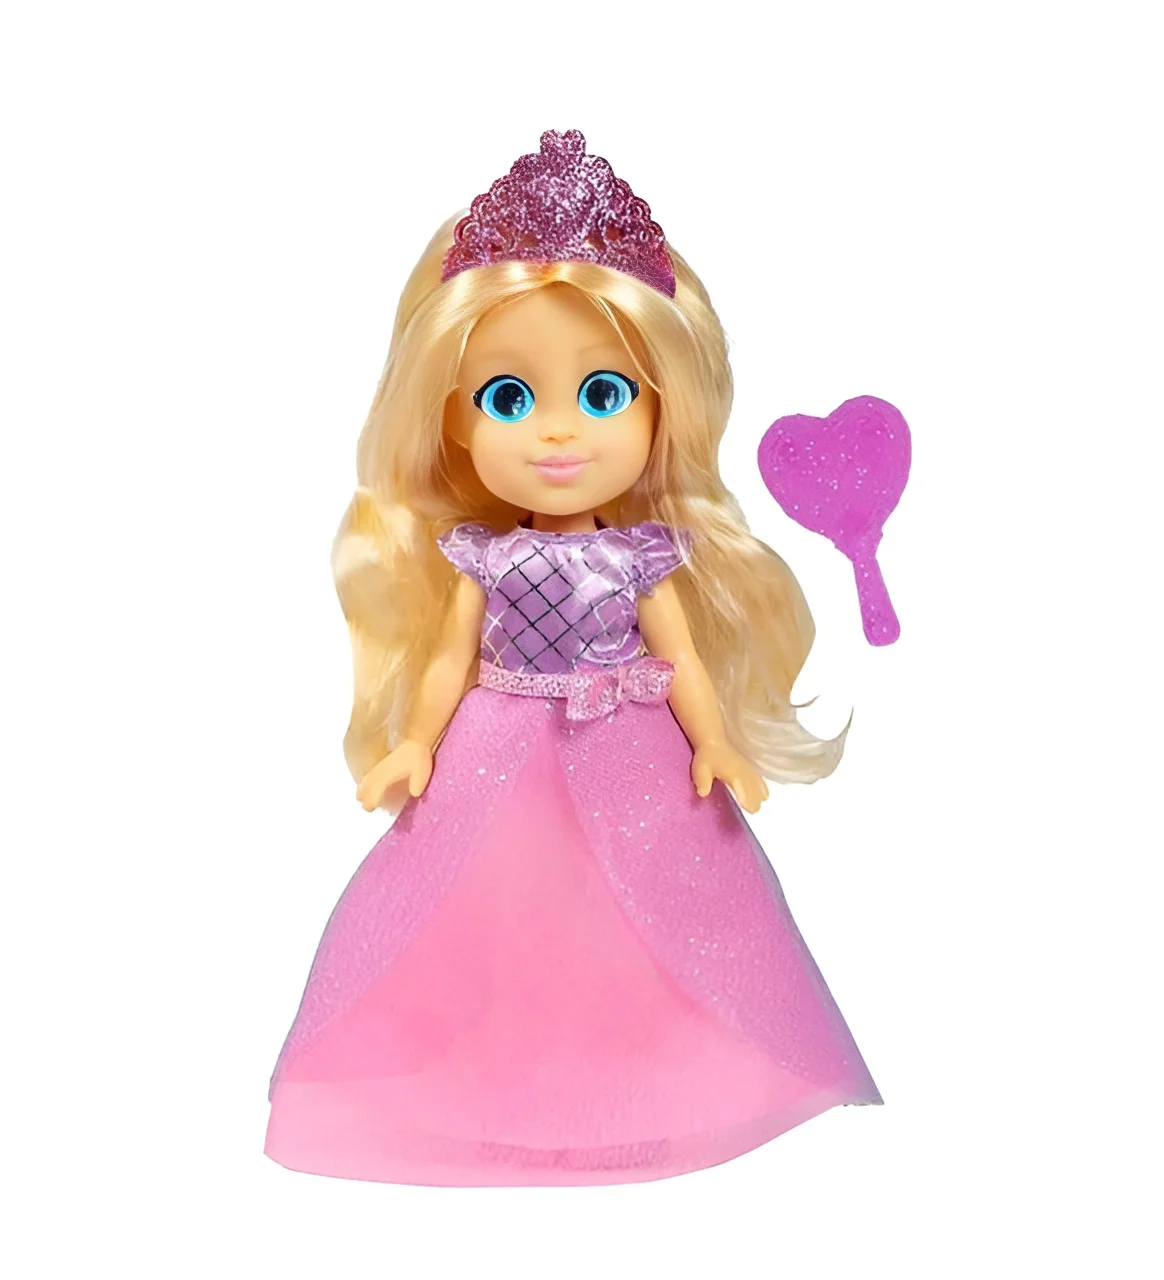 Love Diana Cloth Doll 15 Cm Toy Children Toy Mom & Kids Profession Groups Doctor Princess And Birthday Baby Fun Game ross diana i love you 1 cd